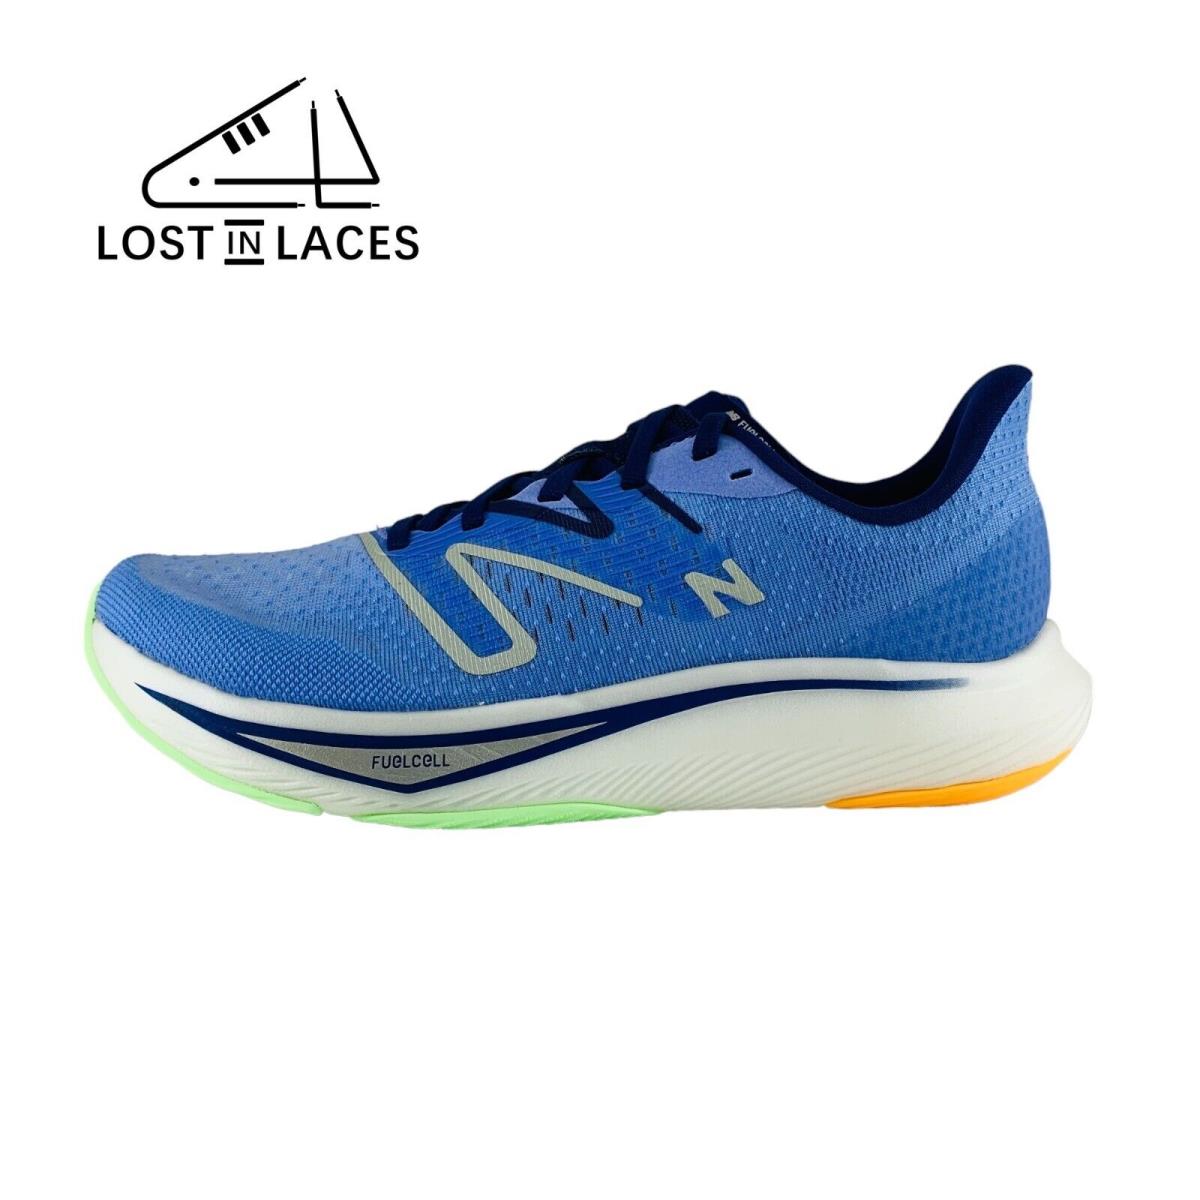 New Balance Fuelcell Rebel v3 Blue White New Running Shoes Women`s Sizes